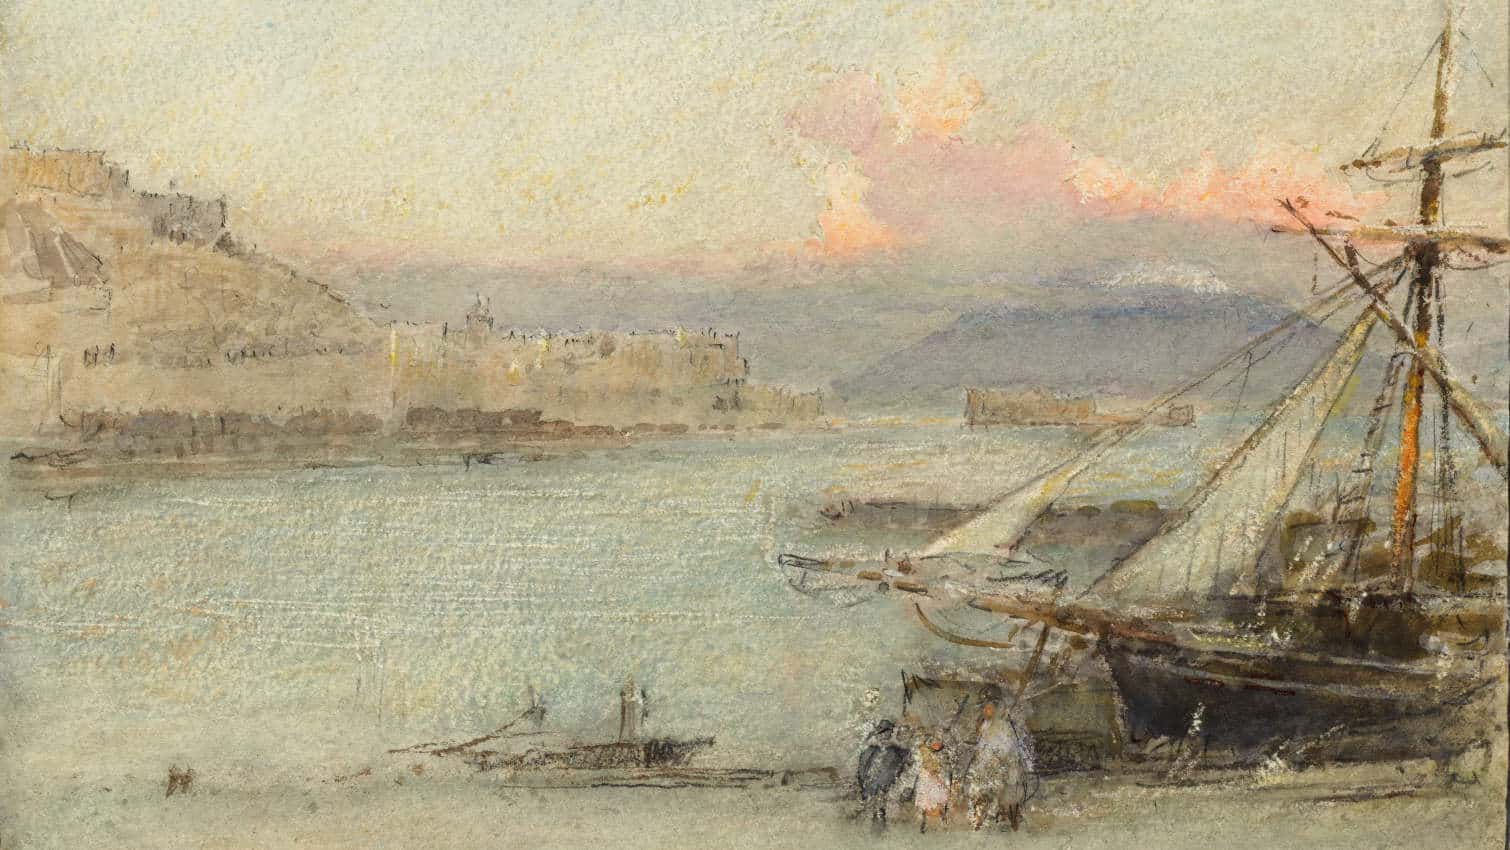 A single-masted wooden ship rides at anchor in the bay of Naples in Albert Goodwin's watercolor painting.